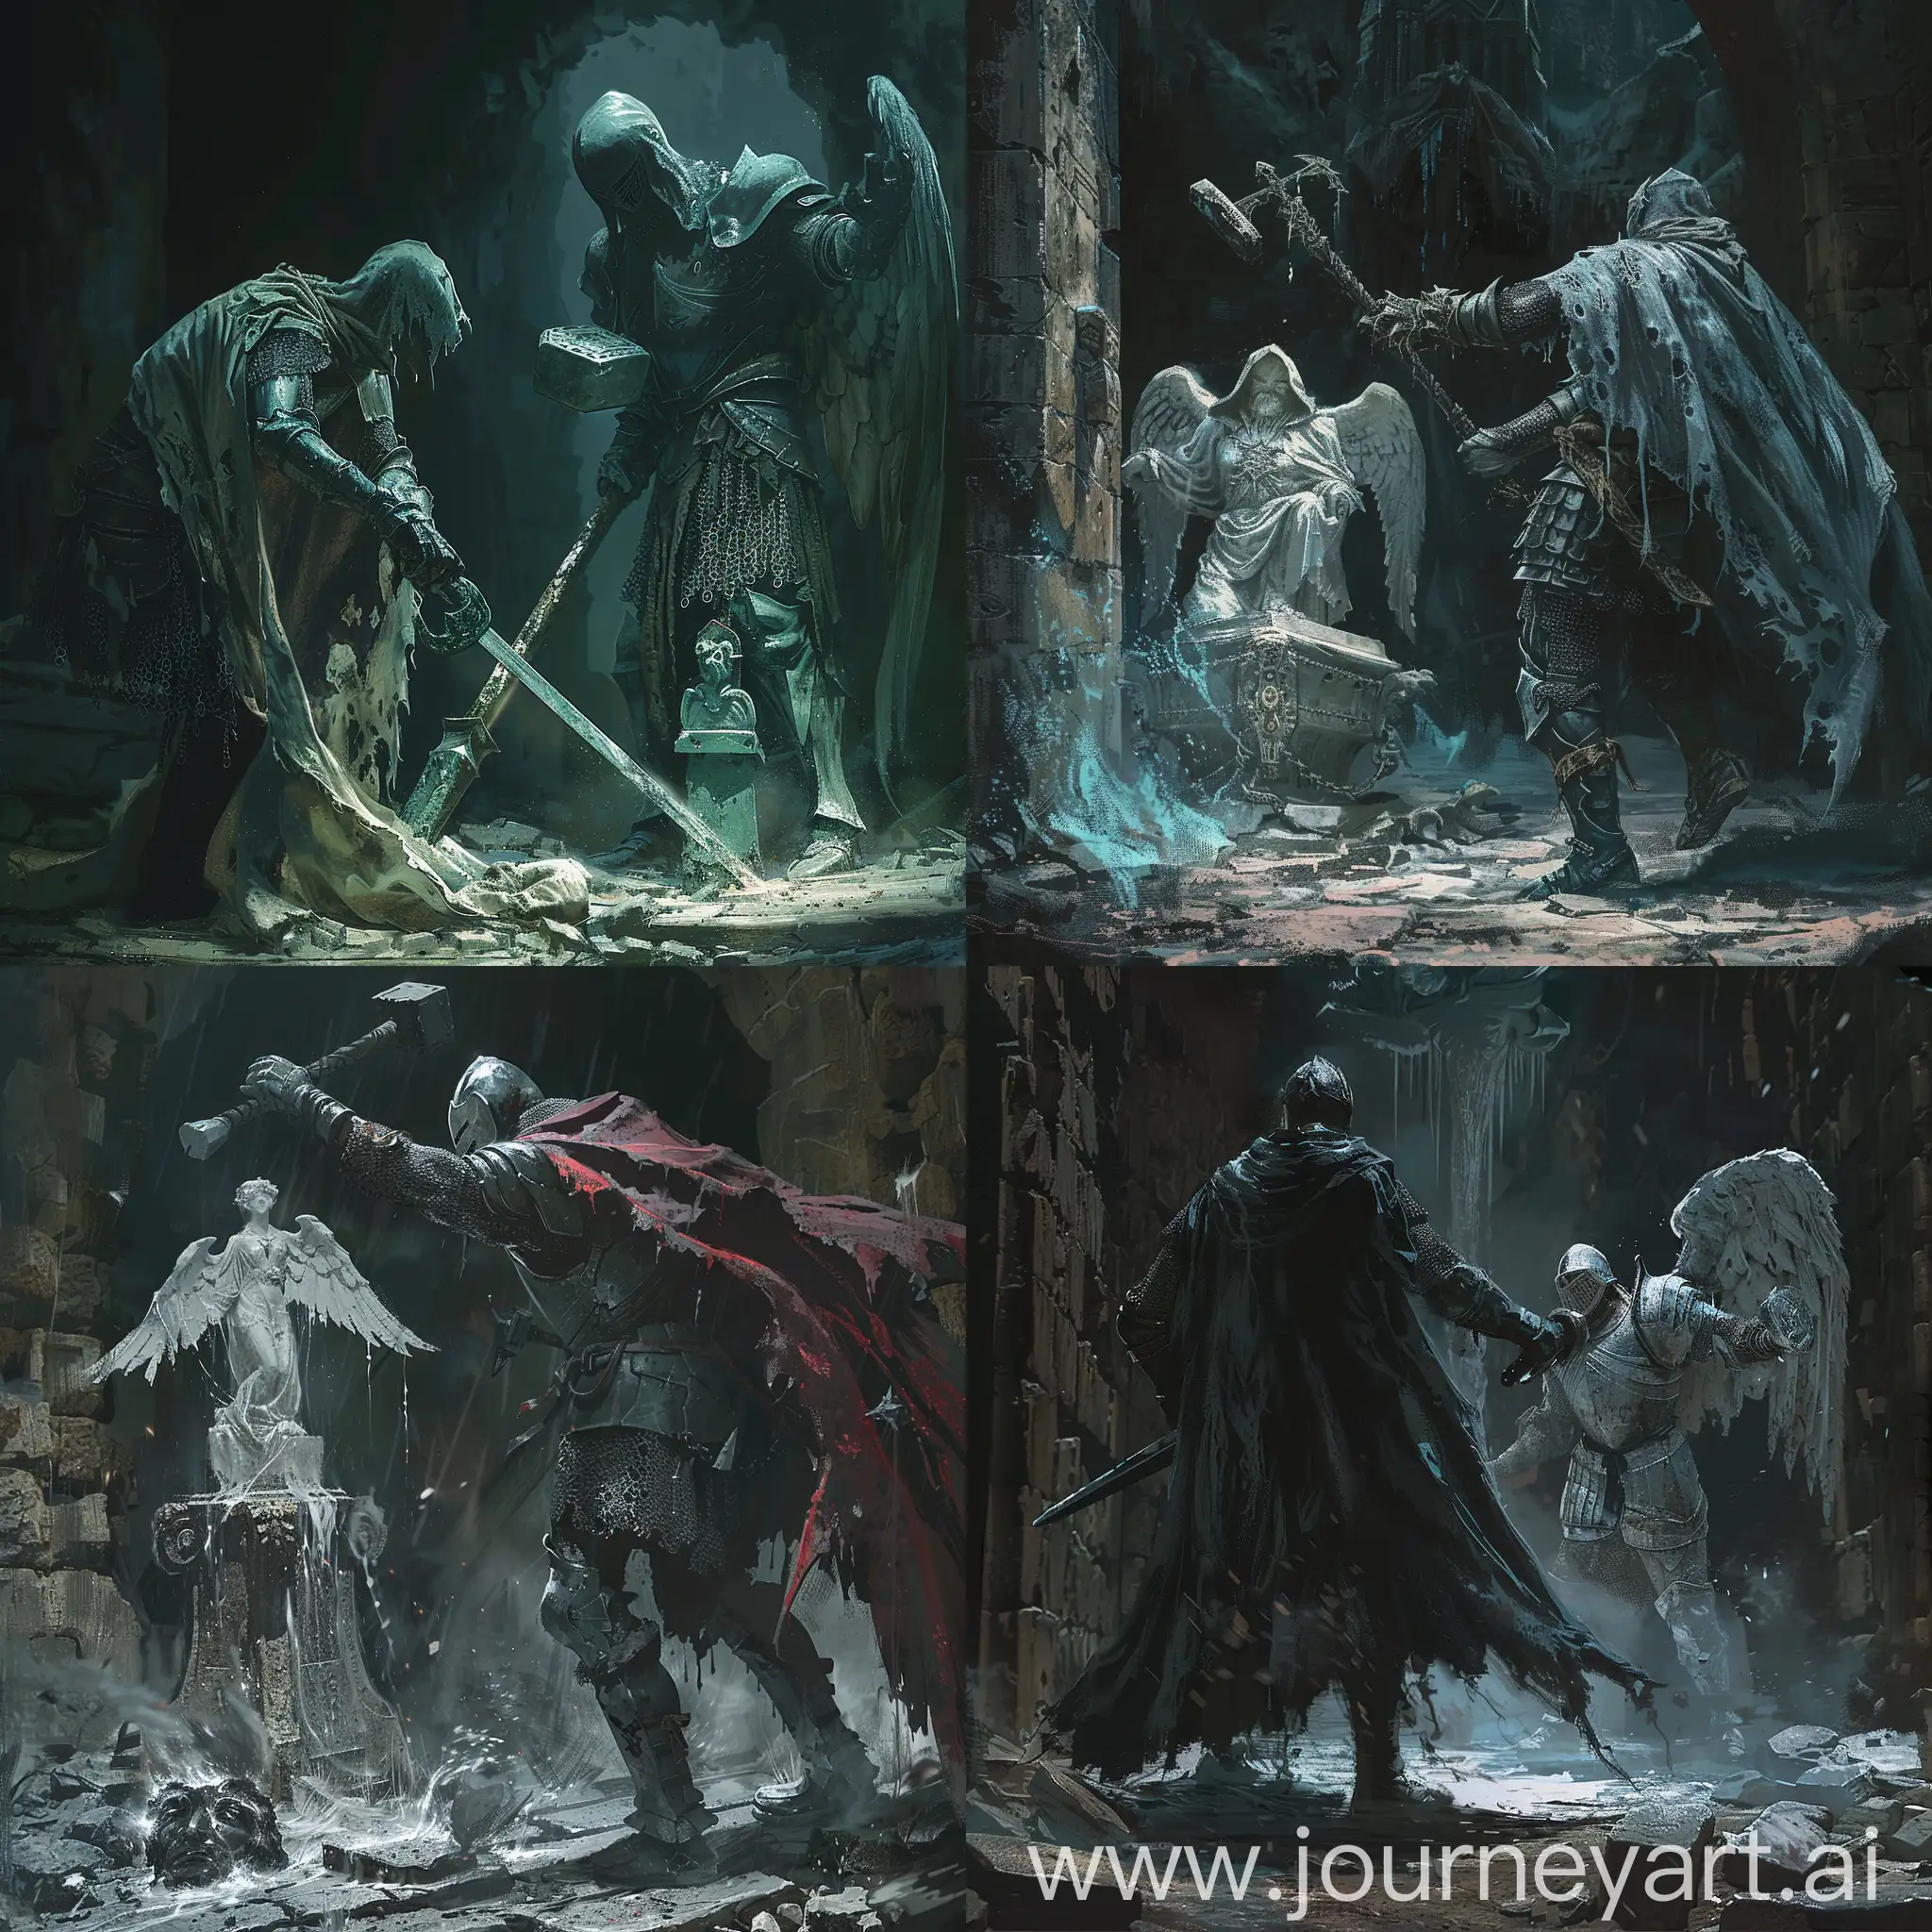 dark fantasy art, a knight of the Middle Ages in 1450 in the style of Dark Souls, a torn cloak is worn over the knight's chain mail, the knight is armed with a mace, the knight fights in a dark dungeon with an evil life angel statue.